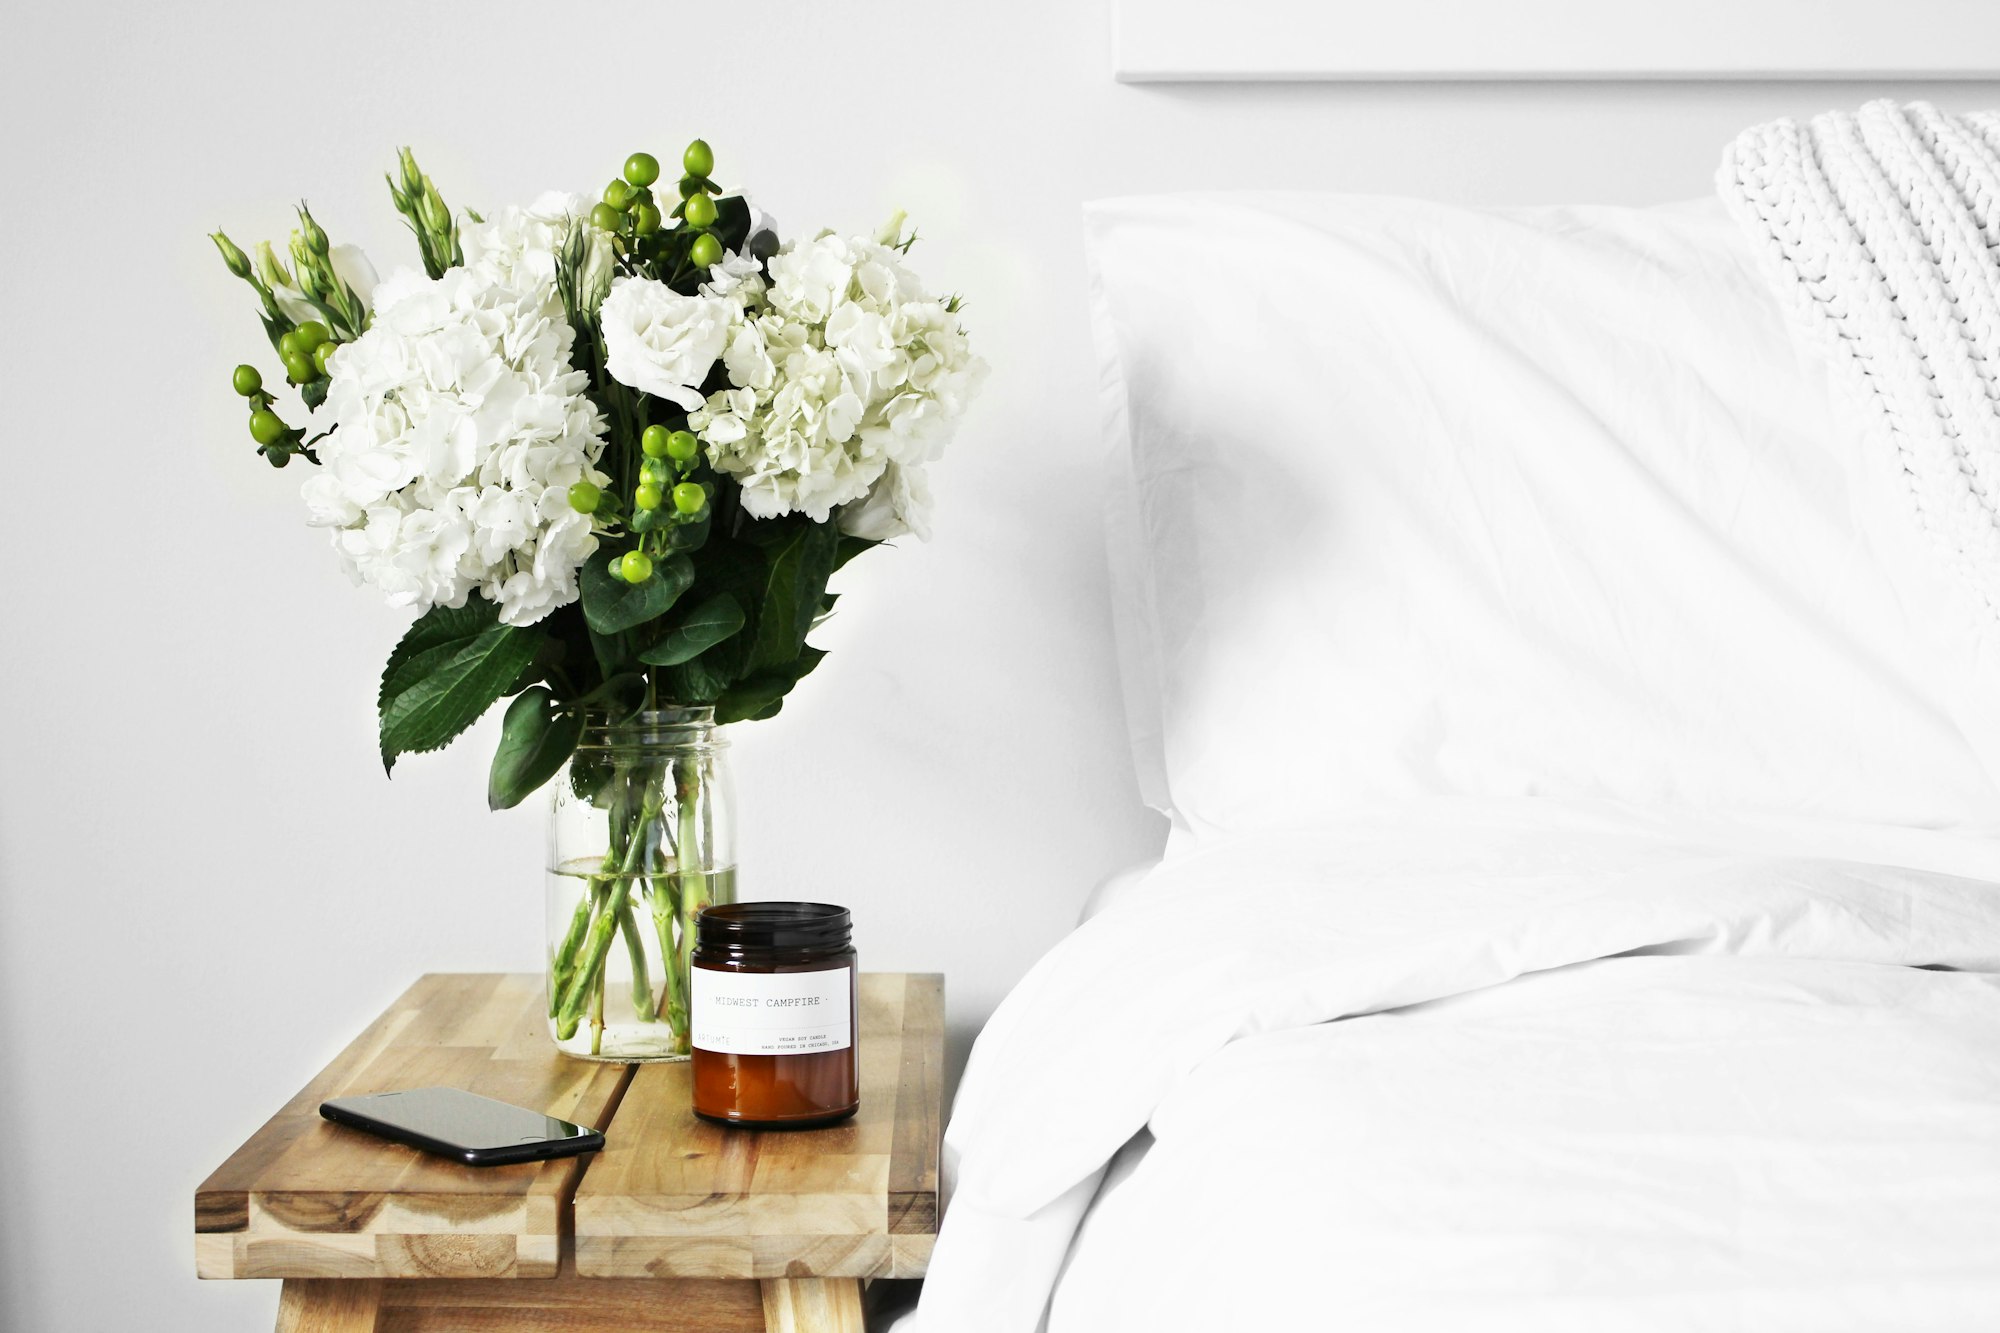 Is there anything better than all-white bedding? It makes me feel like I’m sleeping on a cloud. I made this fresh flower arrangement from flowers I bought at a local shop and had to take a photo.